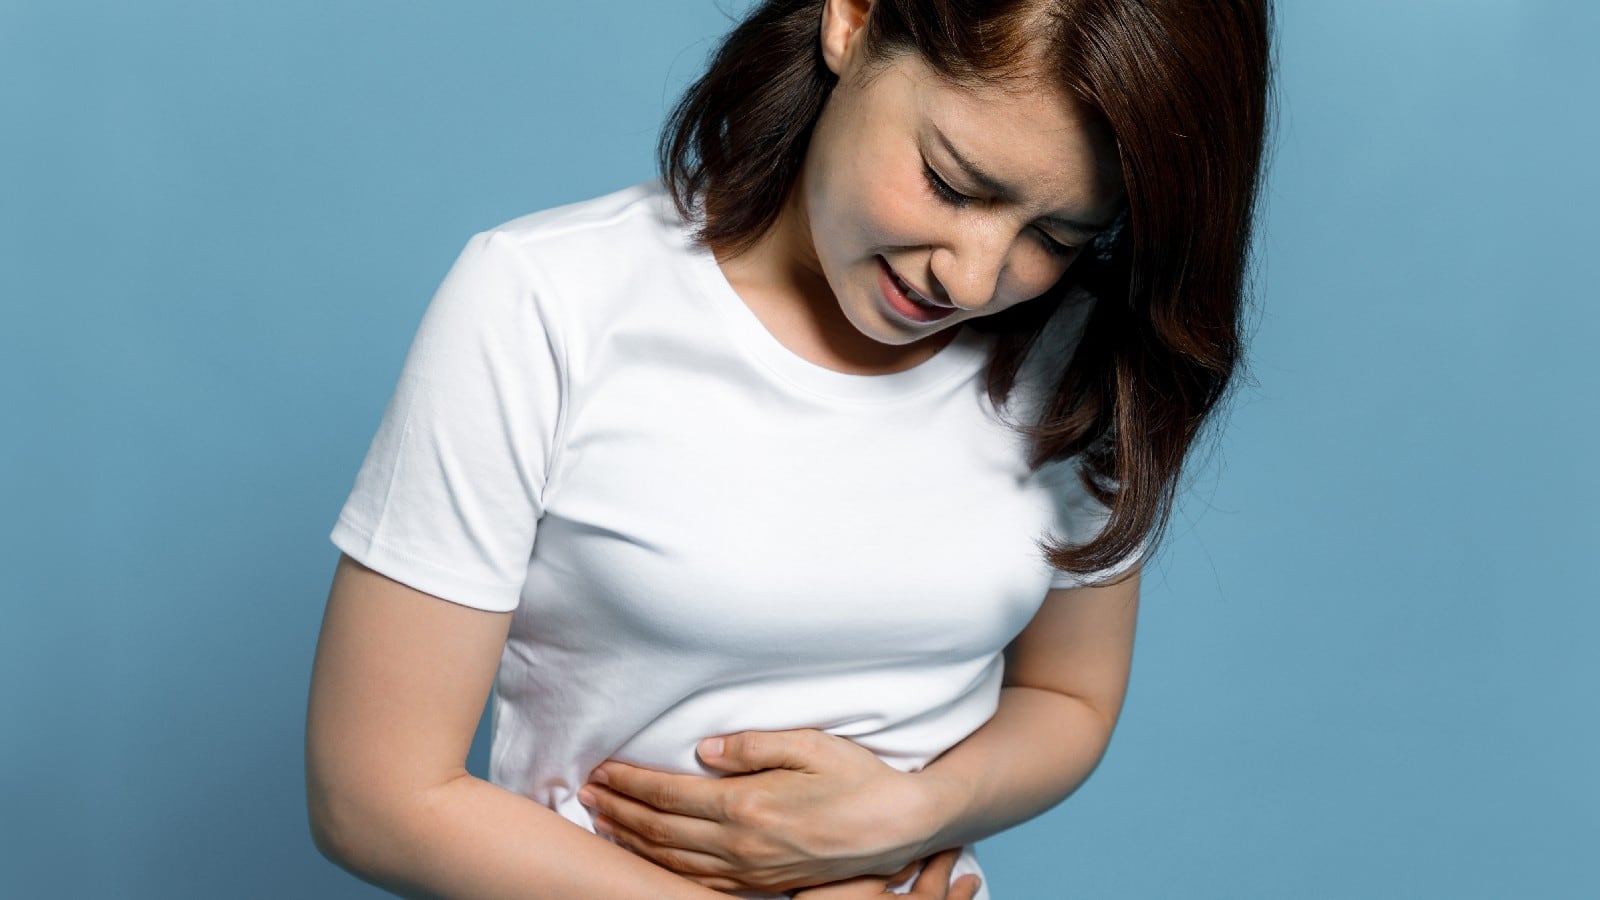 Is UTI one of the causes of pelvic inflammatory diseases?